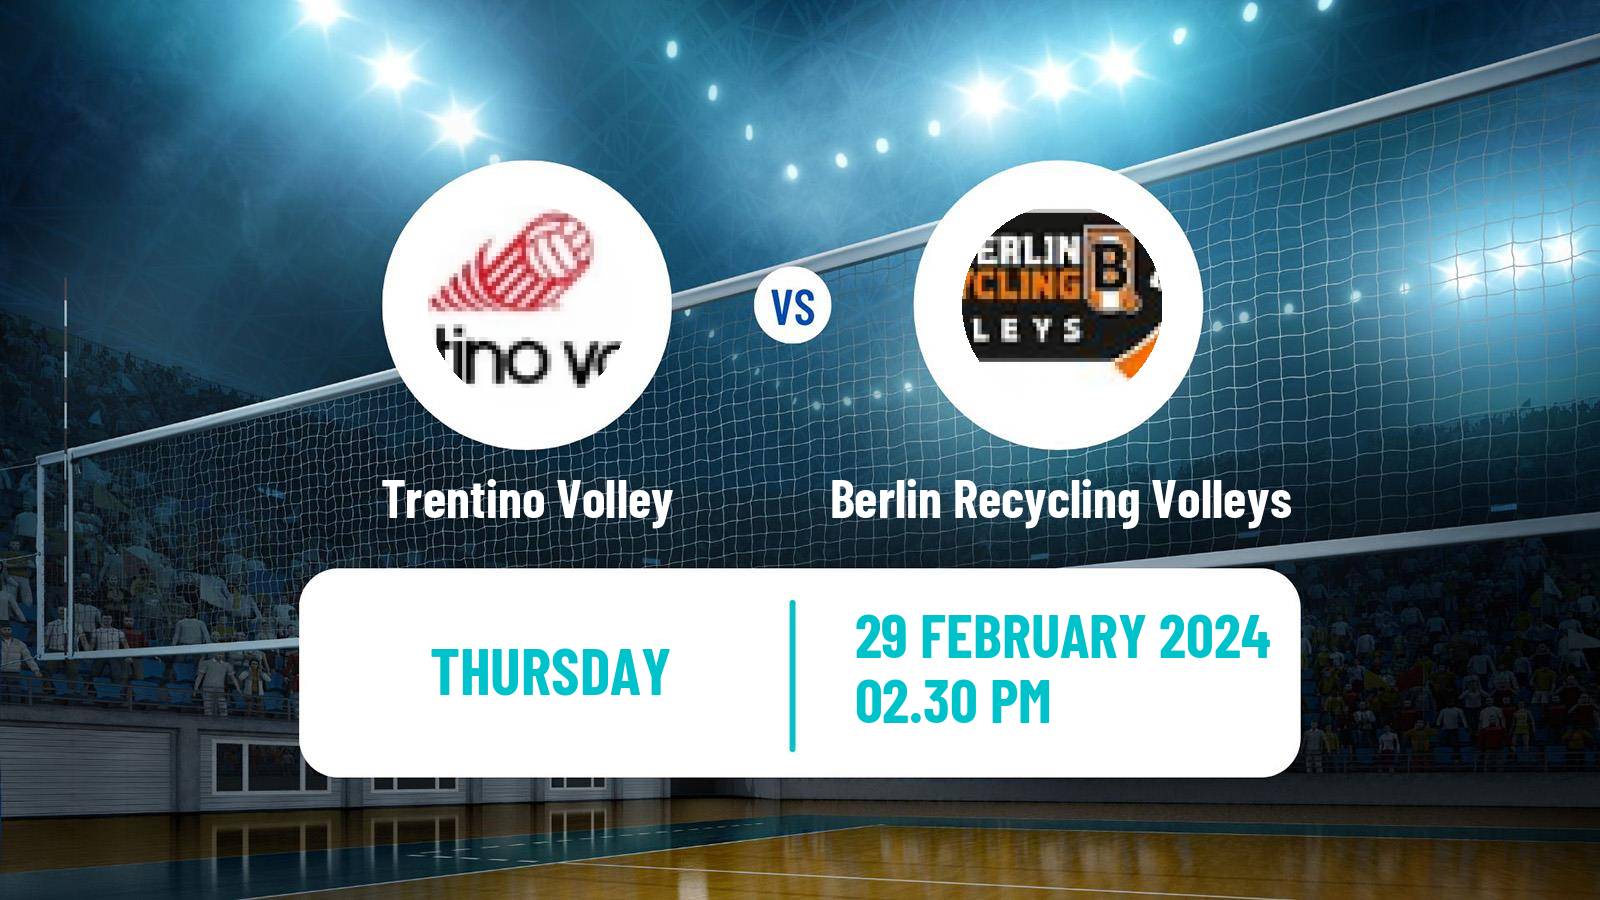 Volleyball CEV Champions League Trentino Volley - Berlin Recycling Volleys